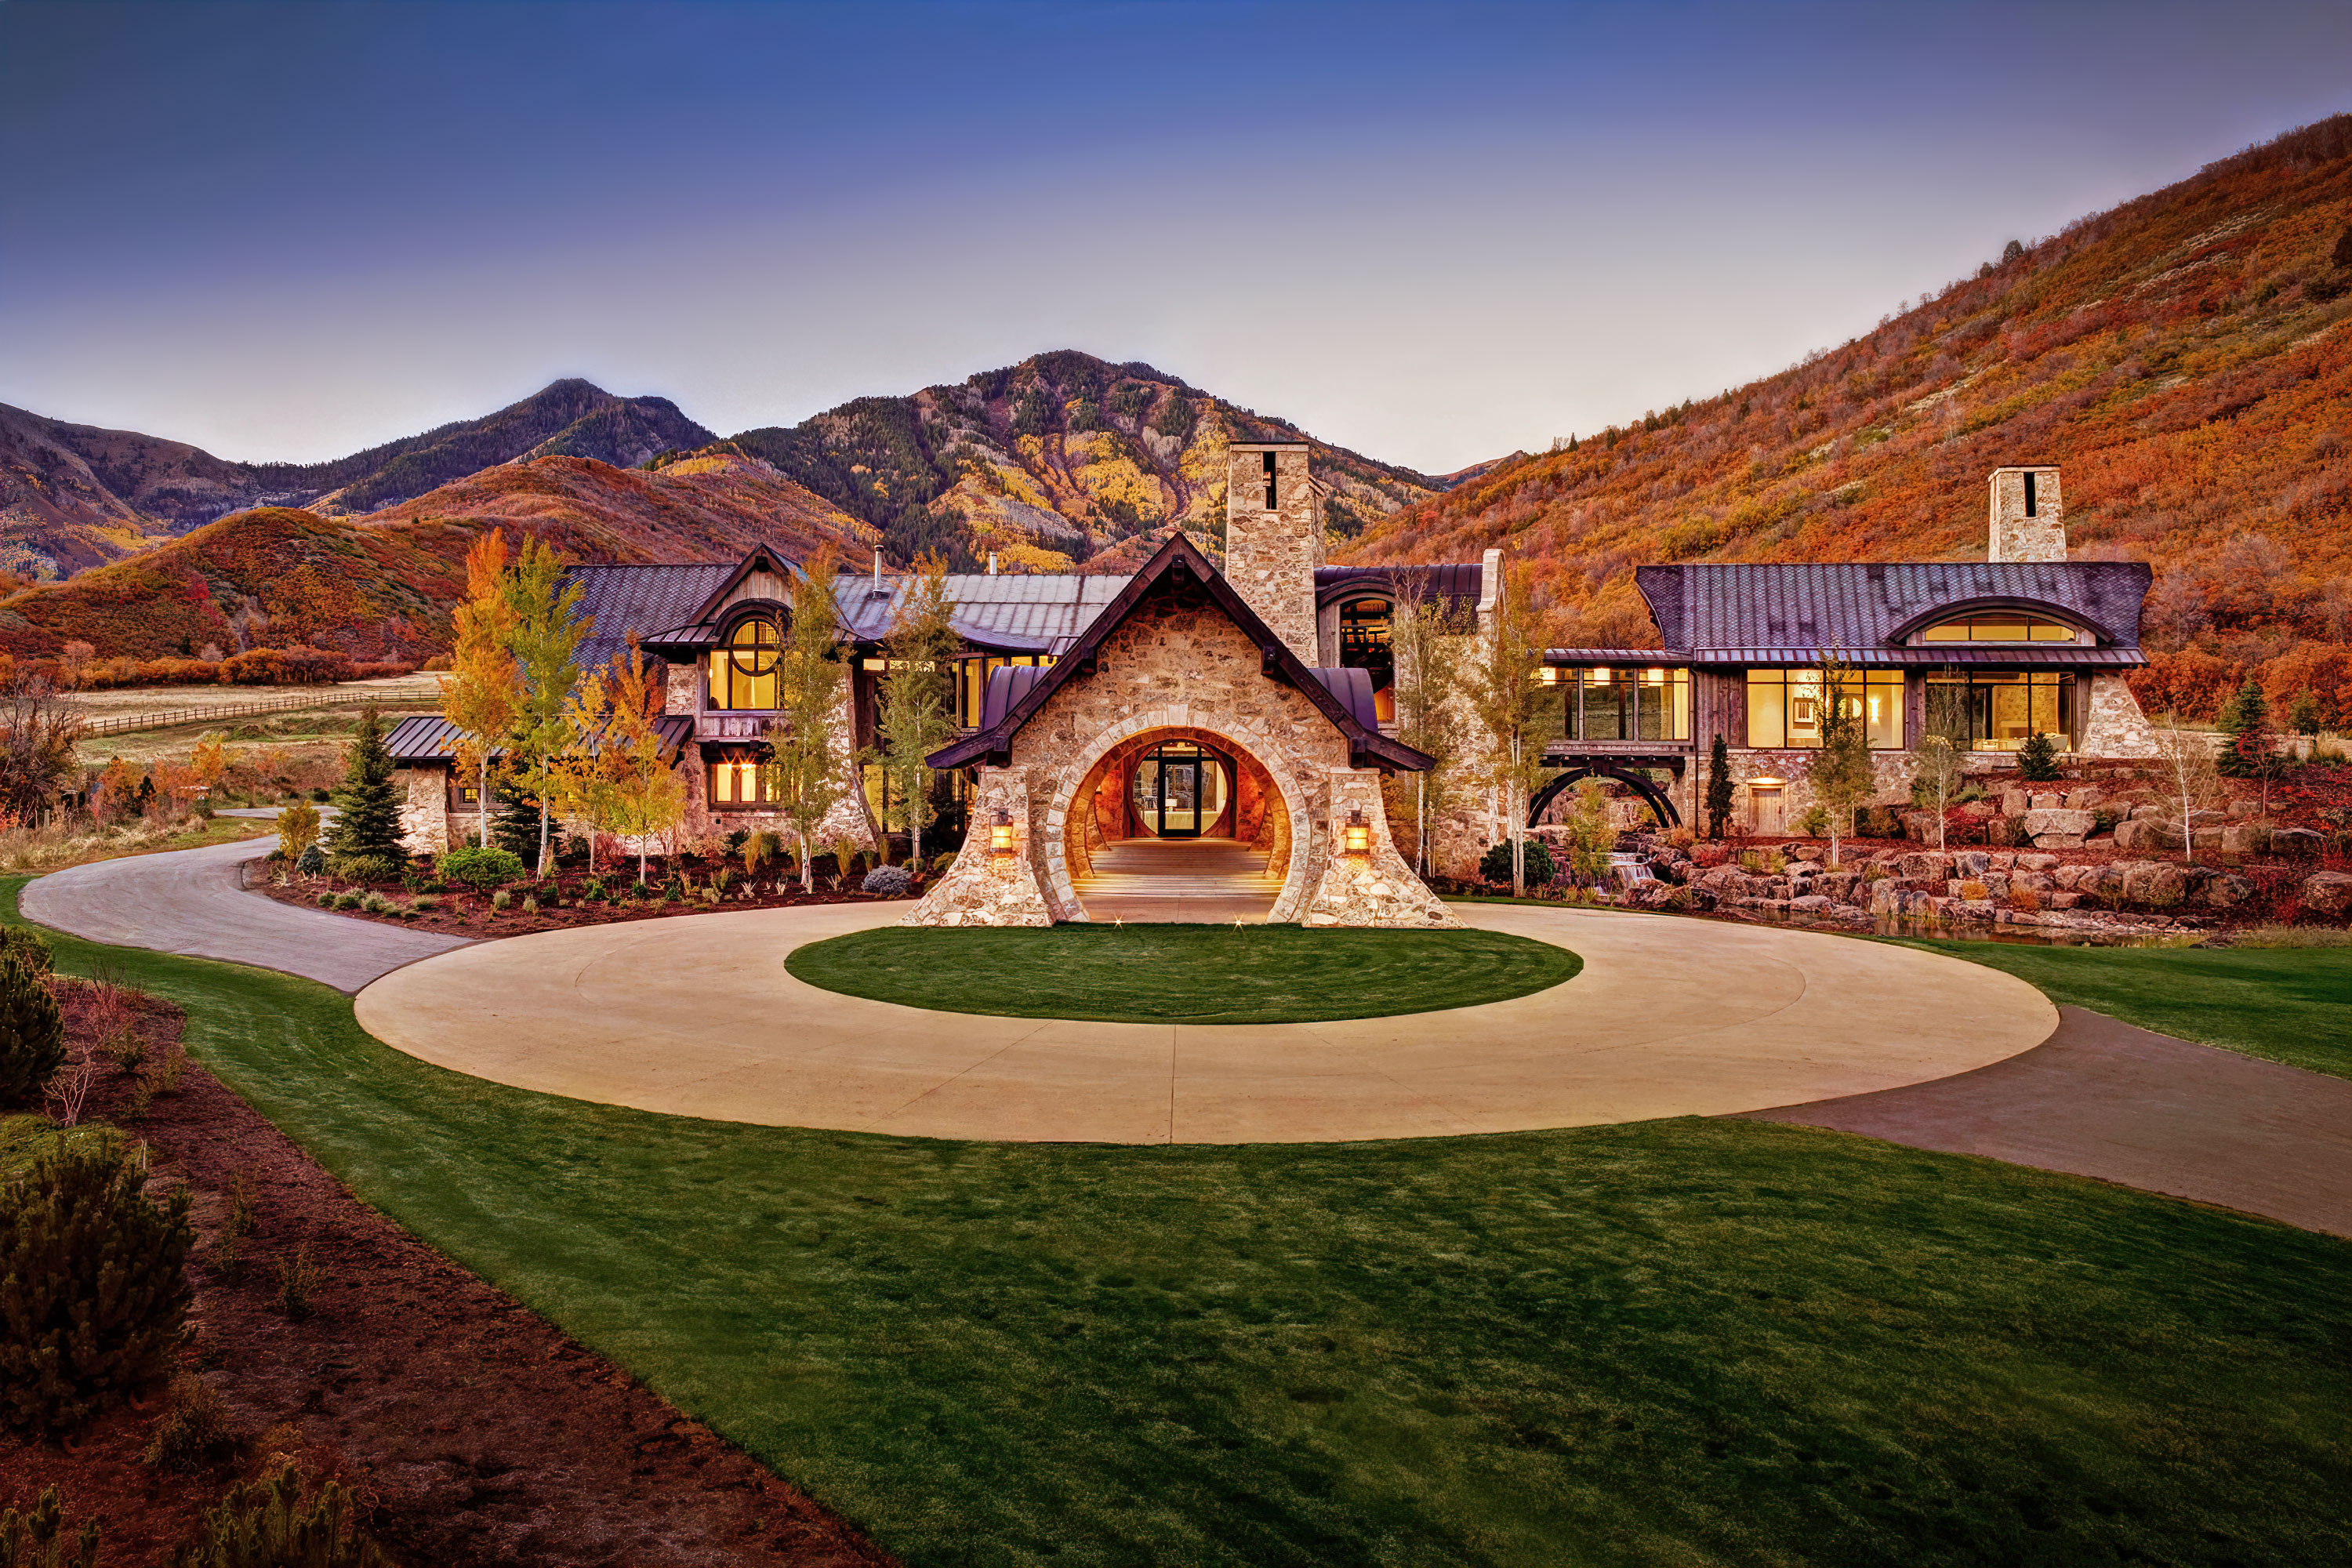 Mountain Estate Home - Provo, Utah. Architectural Photography by Alan Blakely.